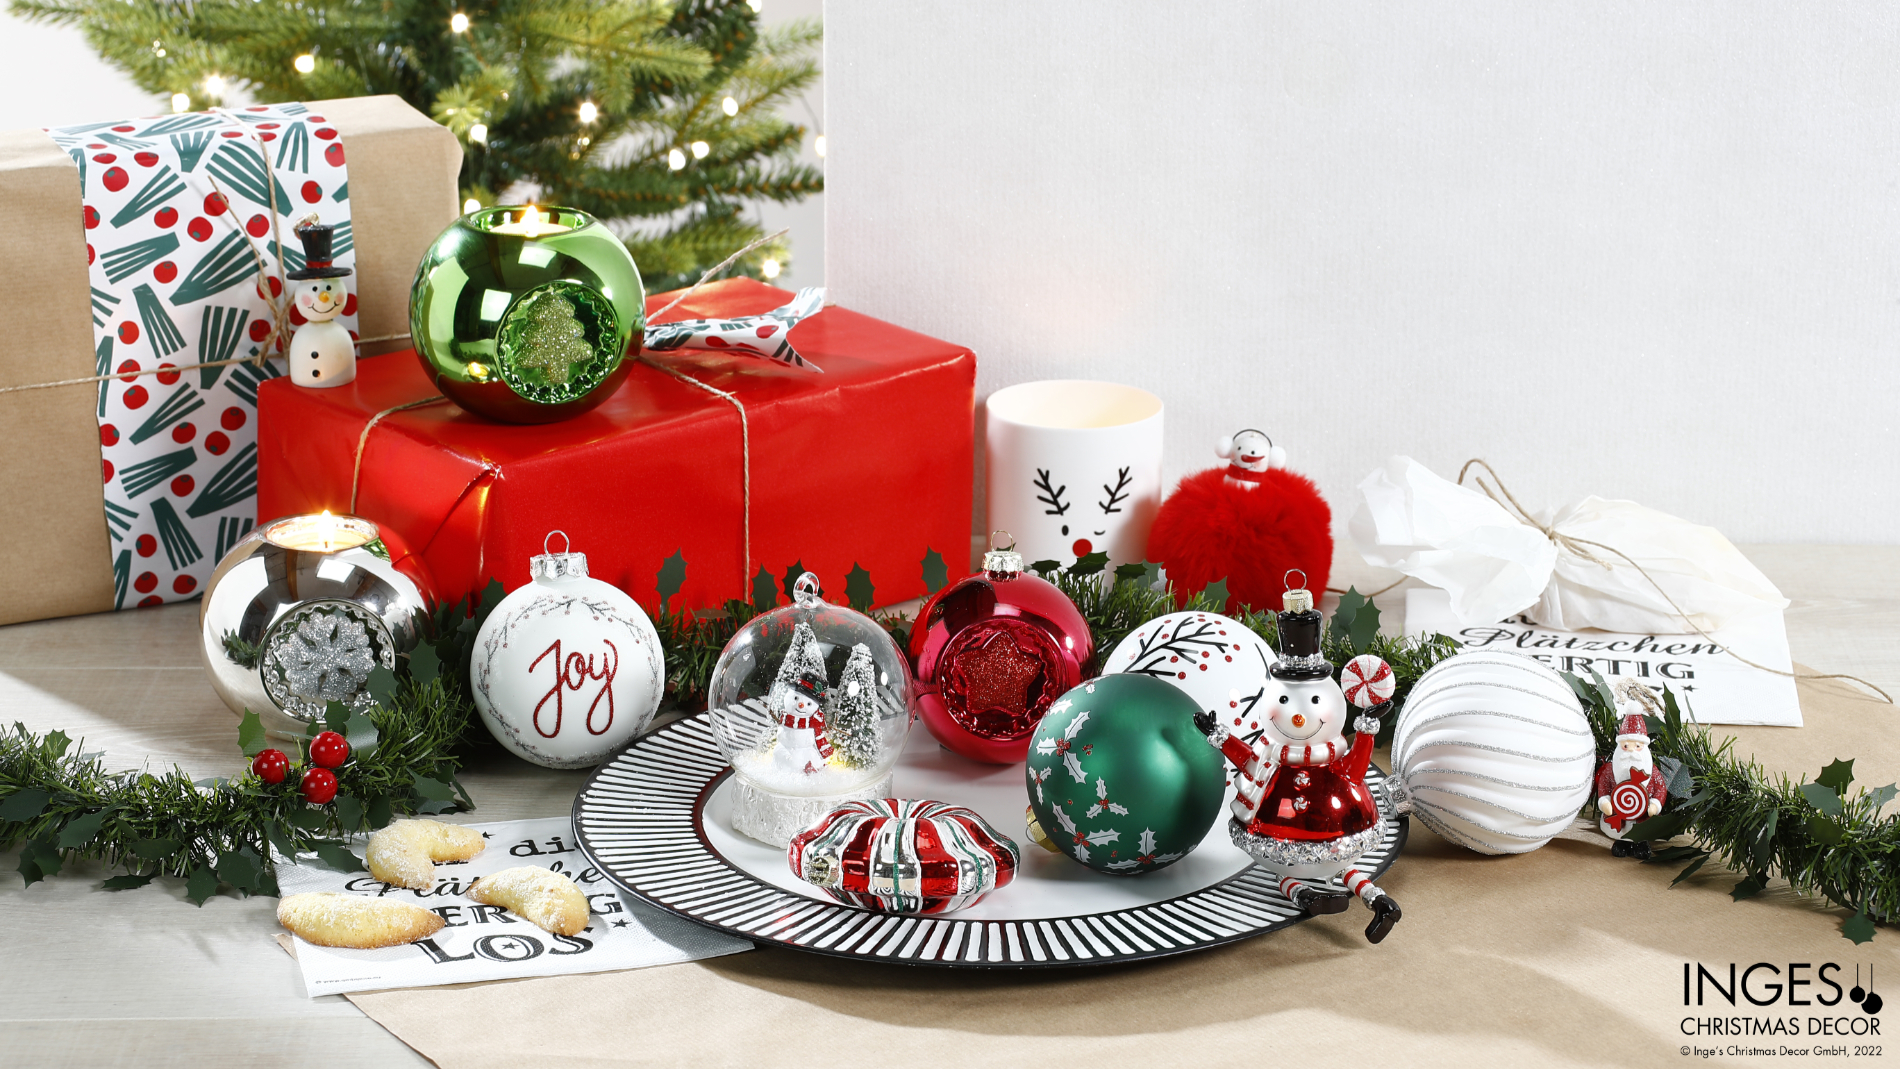 Refreshed Memories features lots of fresh white and classics interpreted in a modern way. Photo: Inge’s Christmas Decor